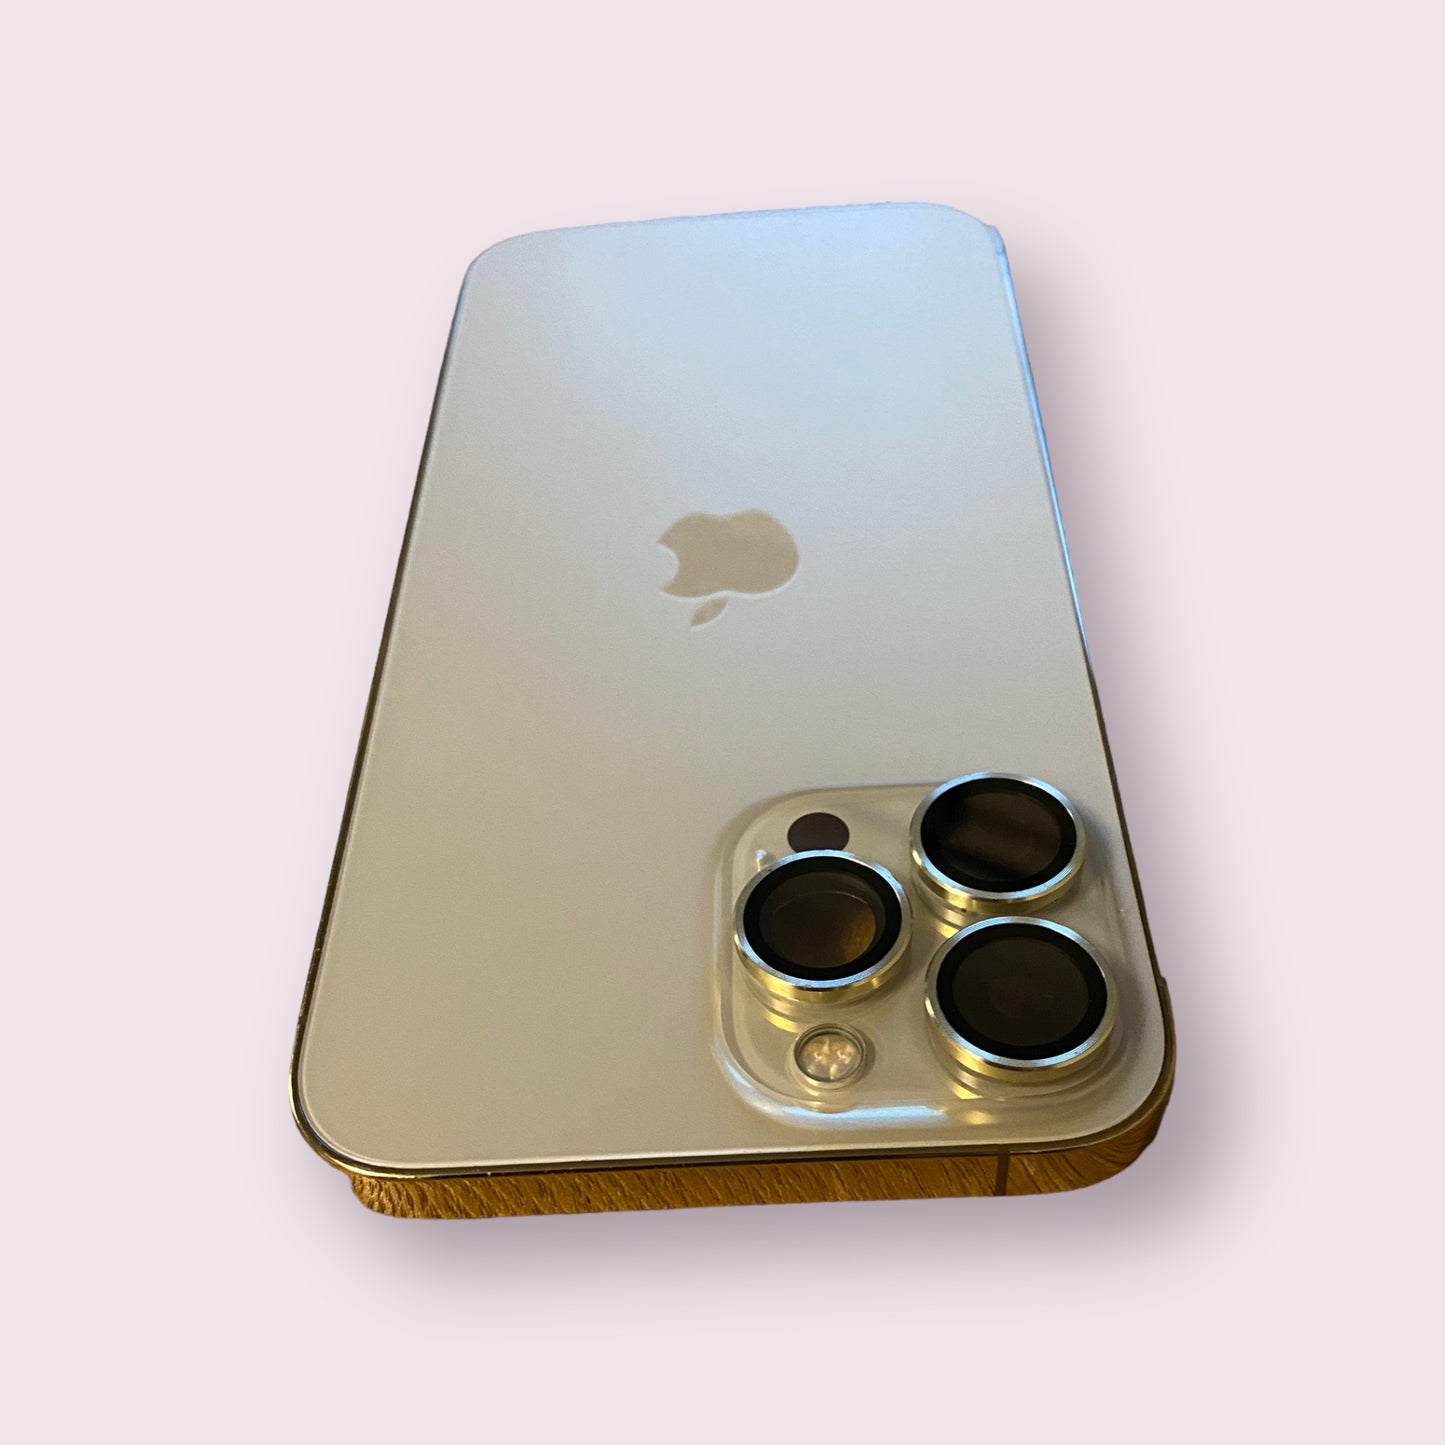 Apple iPhone 13 Pro Max Rear housing back cover Gold - Genuine Pull Part - Grade A